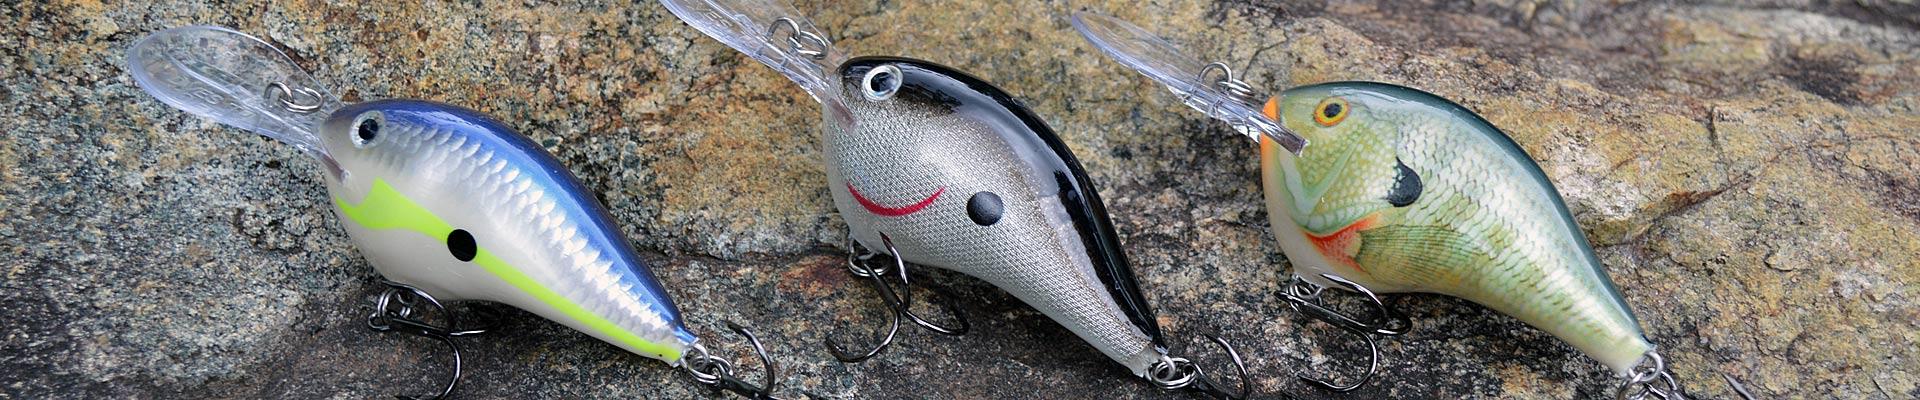 Fishing Lure Color Selection - Choosing the Best Color – MONSTERBASS